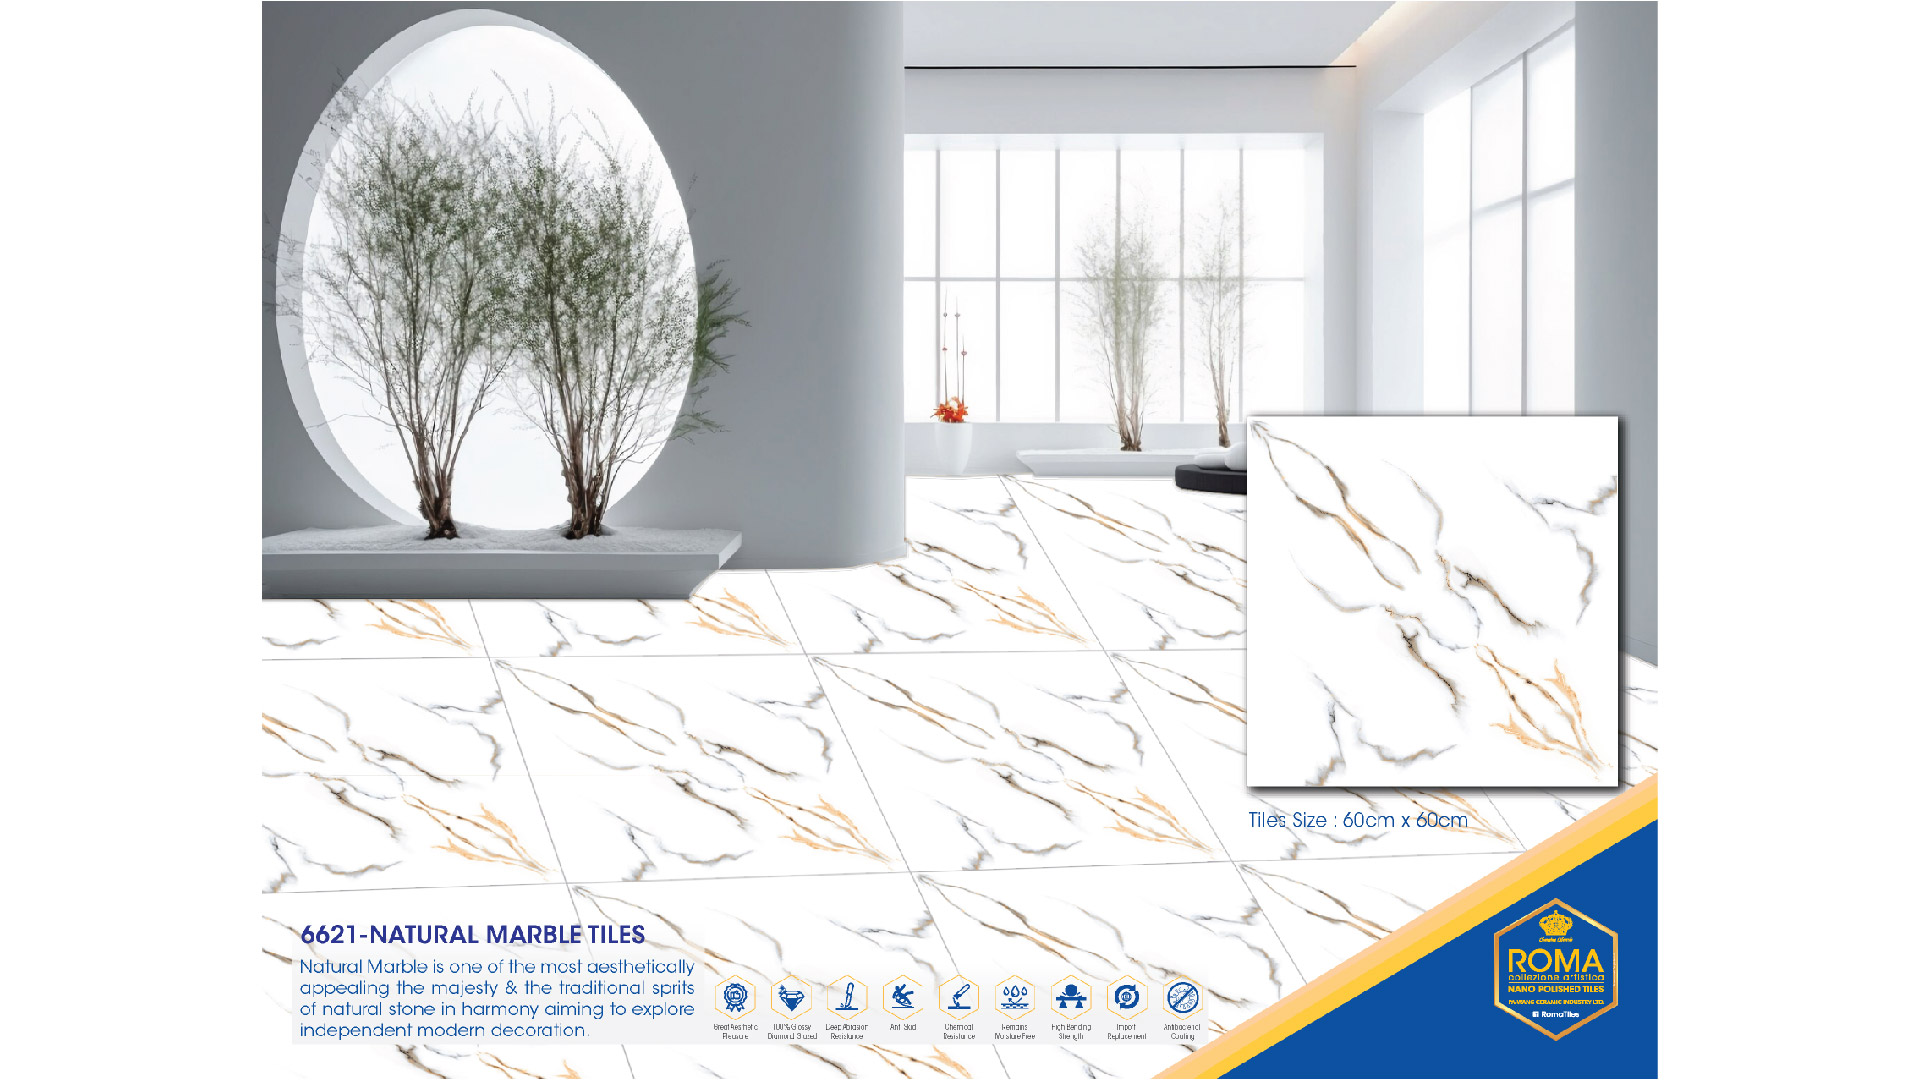 NATURAL MARBLE TILES